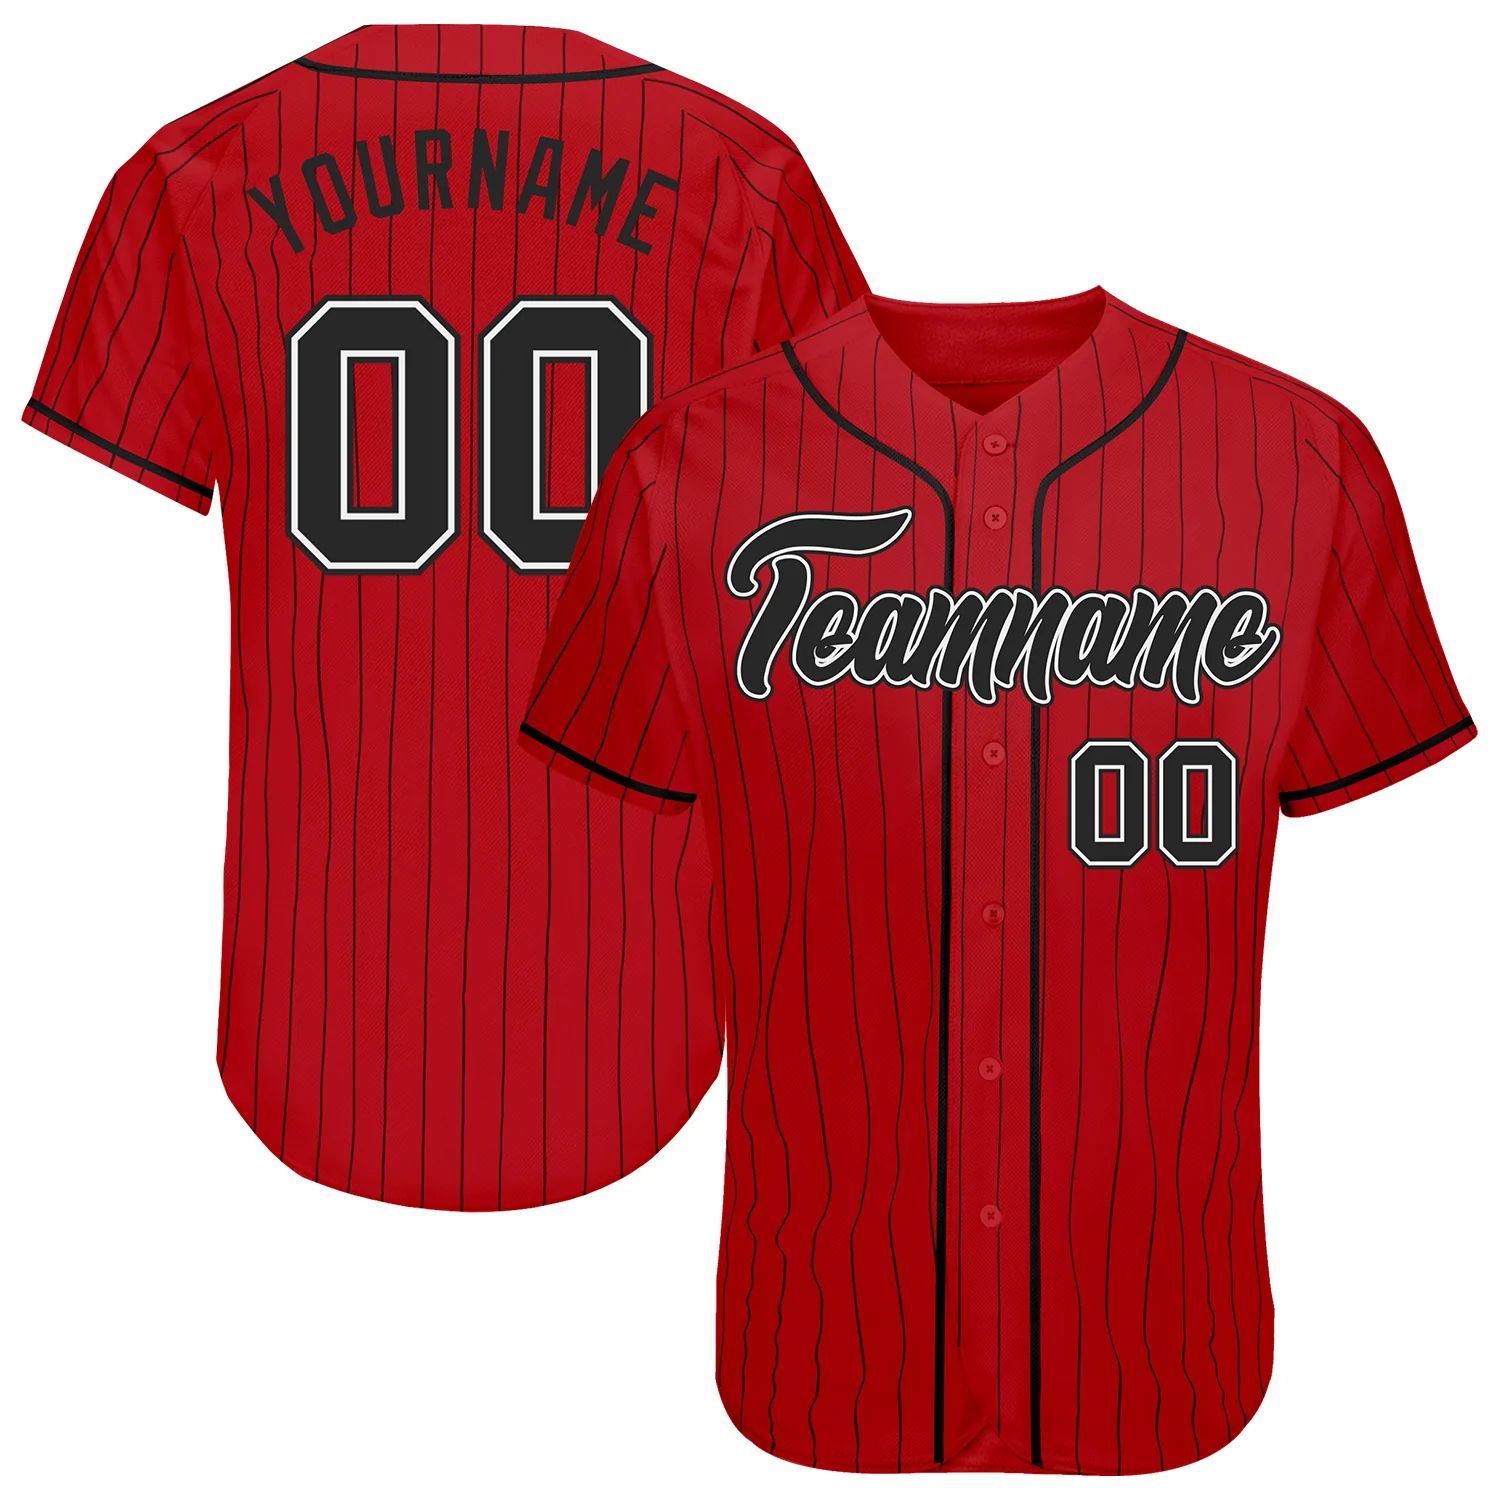 build-white-red-baseball-black-jersey-authentic-red0222-online-1.jpg